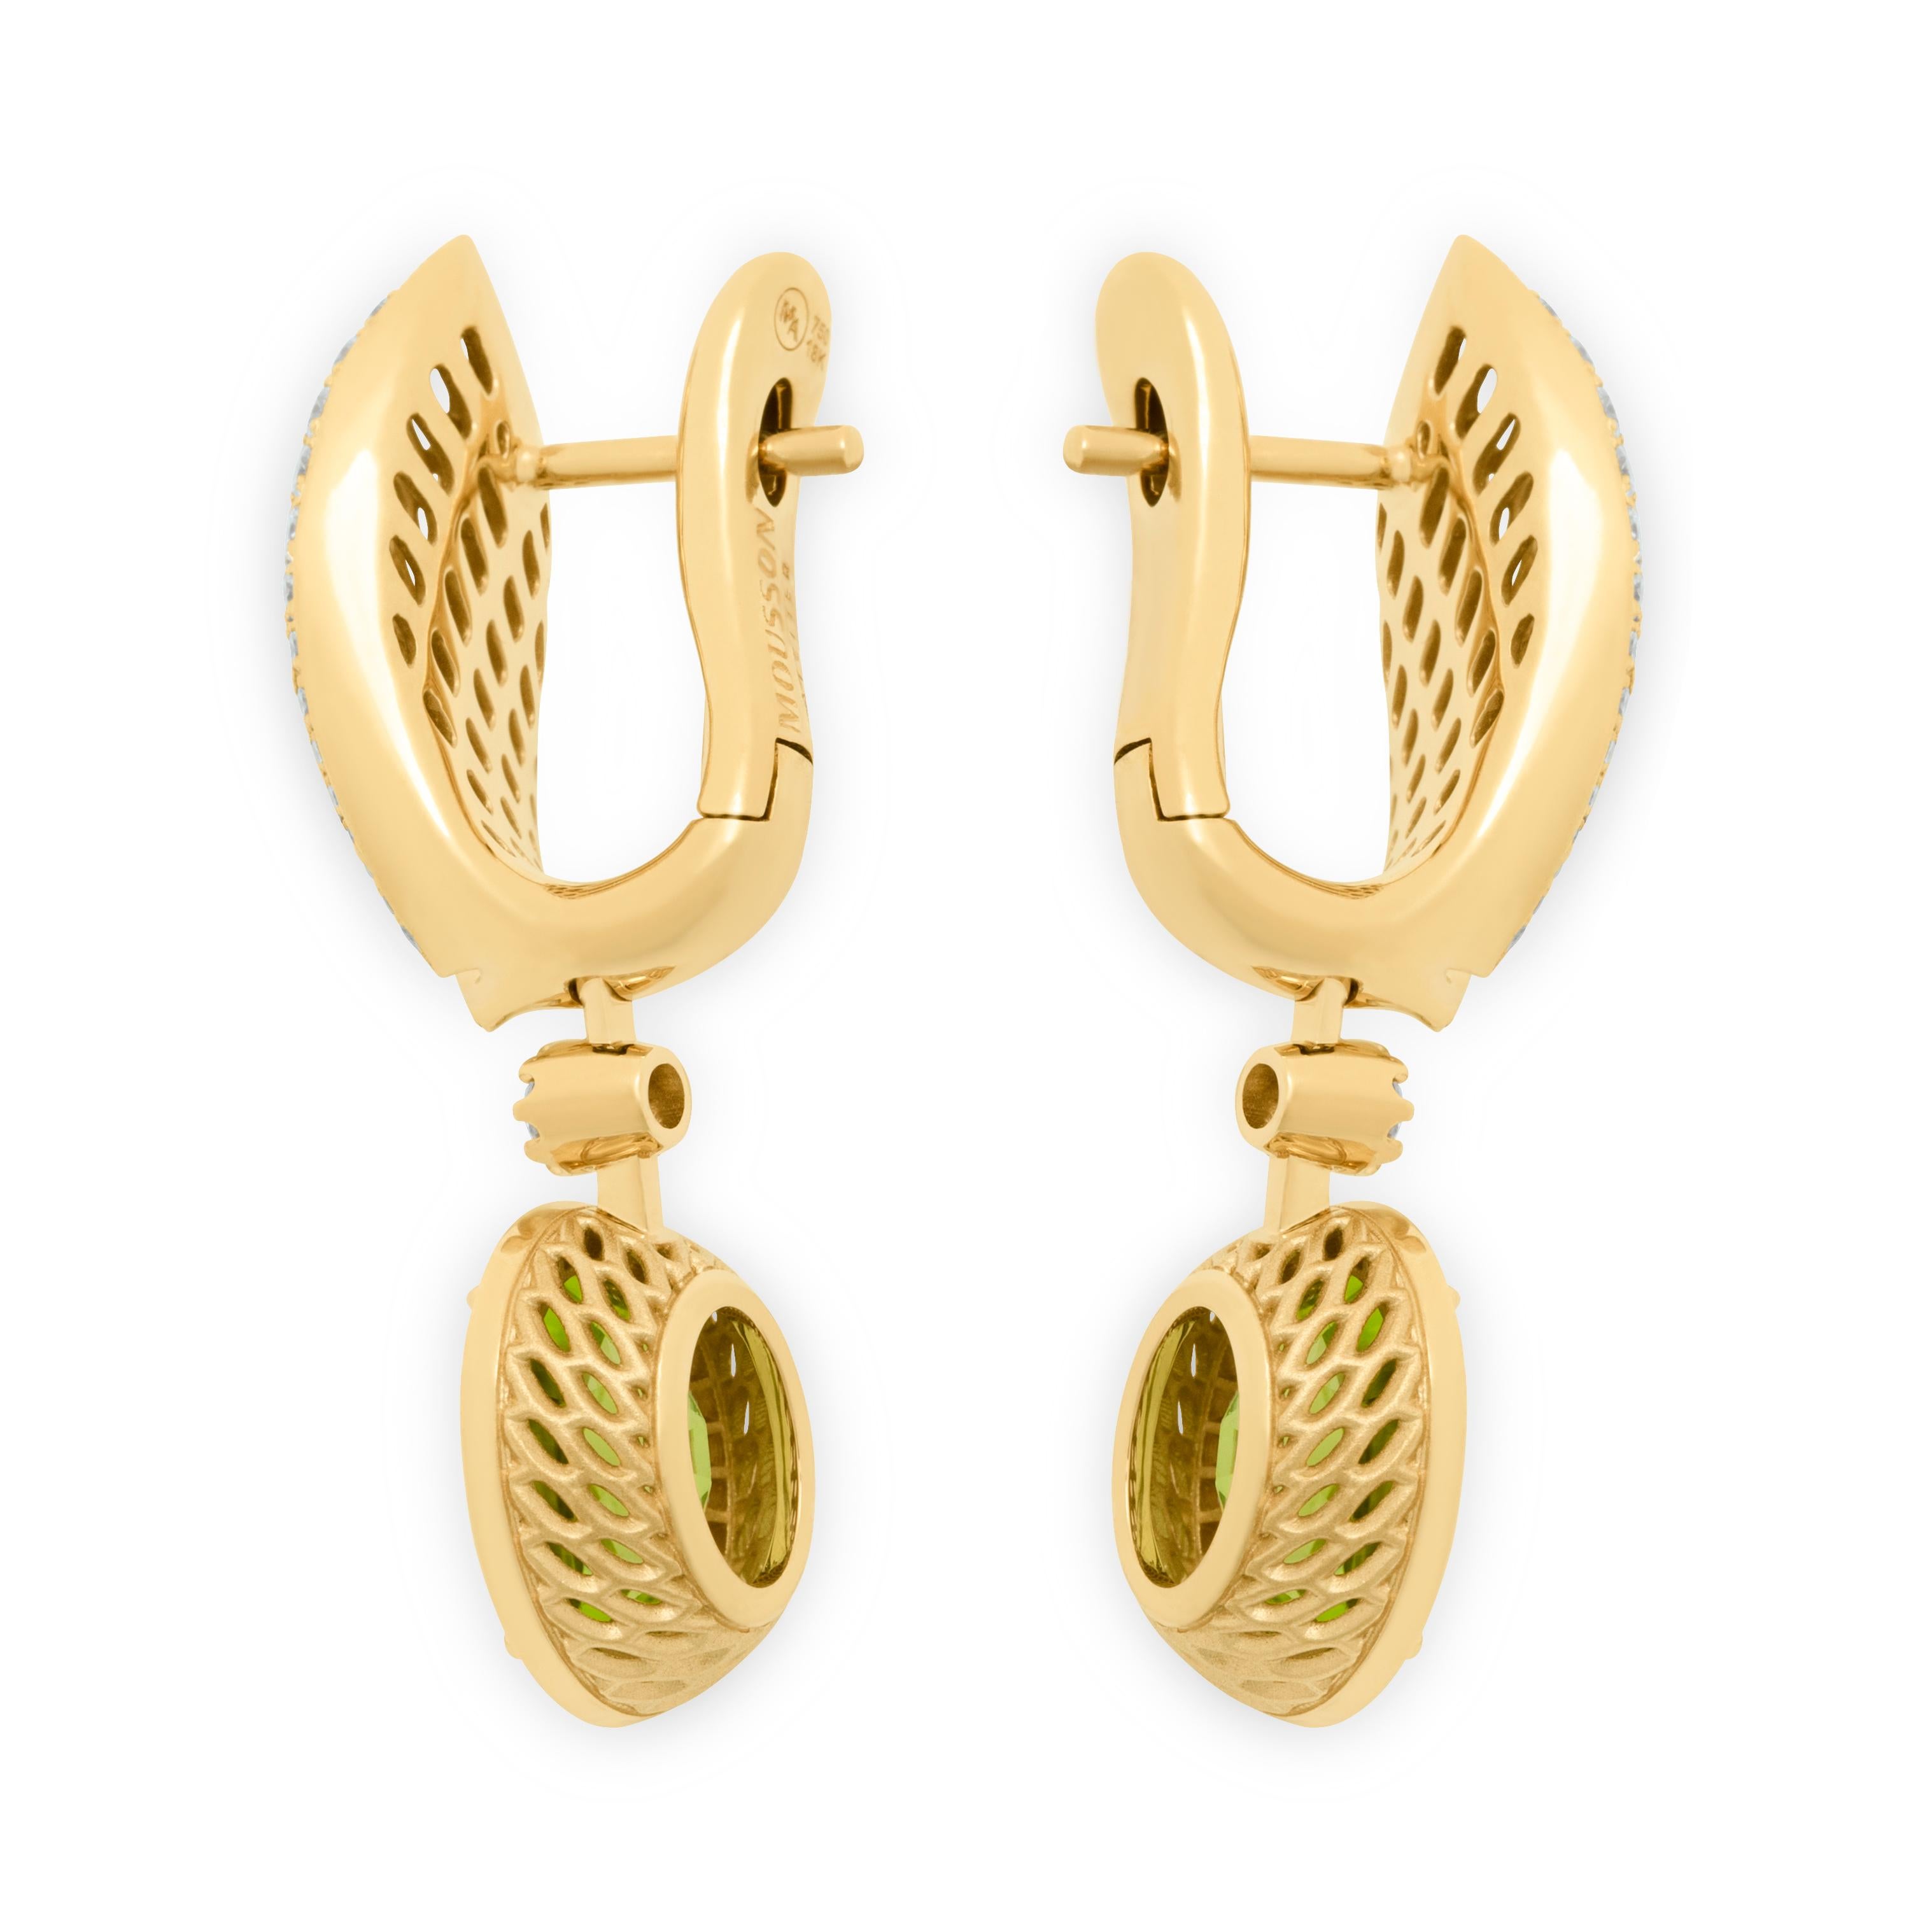 Peridot 4.03 Carat Diamonds 18 Karat Yellow Gold New Classic Earrings
We have published a series of new Earrings with the same idea but with different details. Introducing Earrings crafted from 18 Karat Yellow Gold, which in company with two 4.03